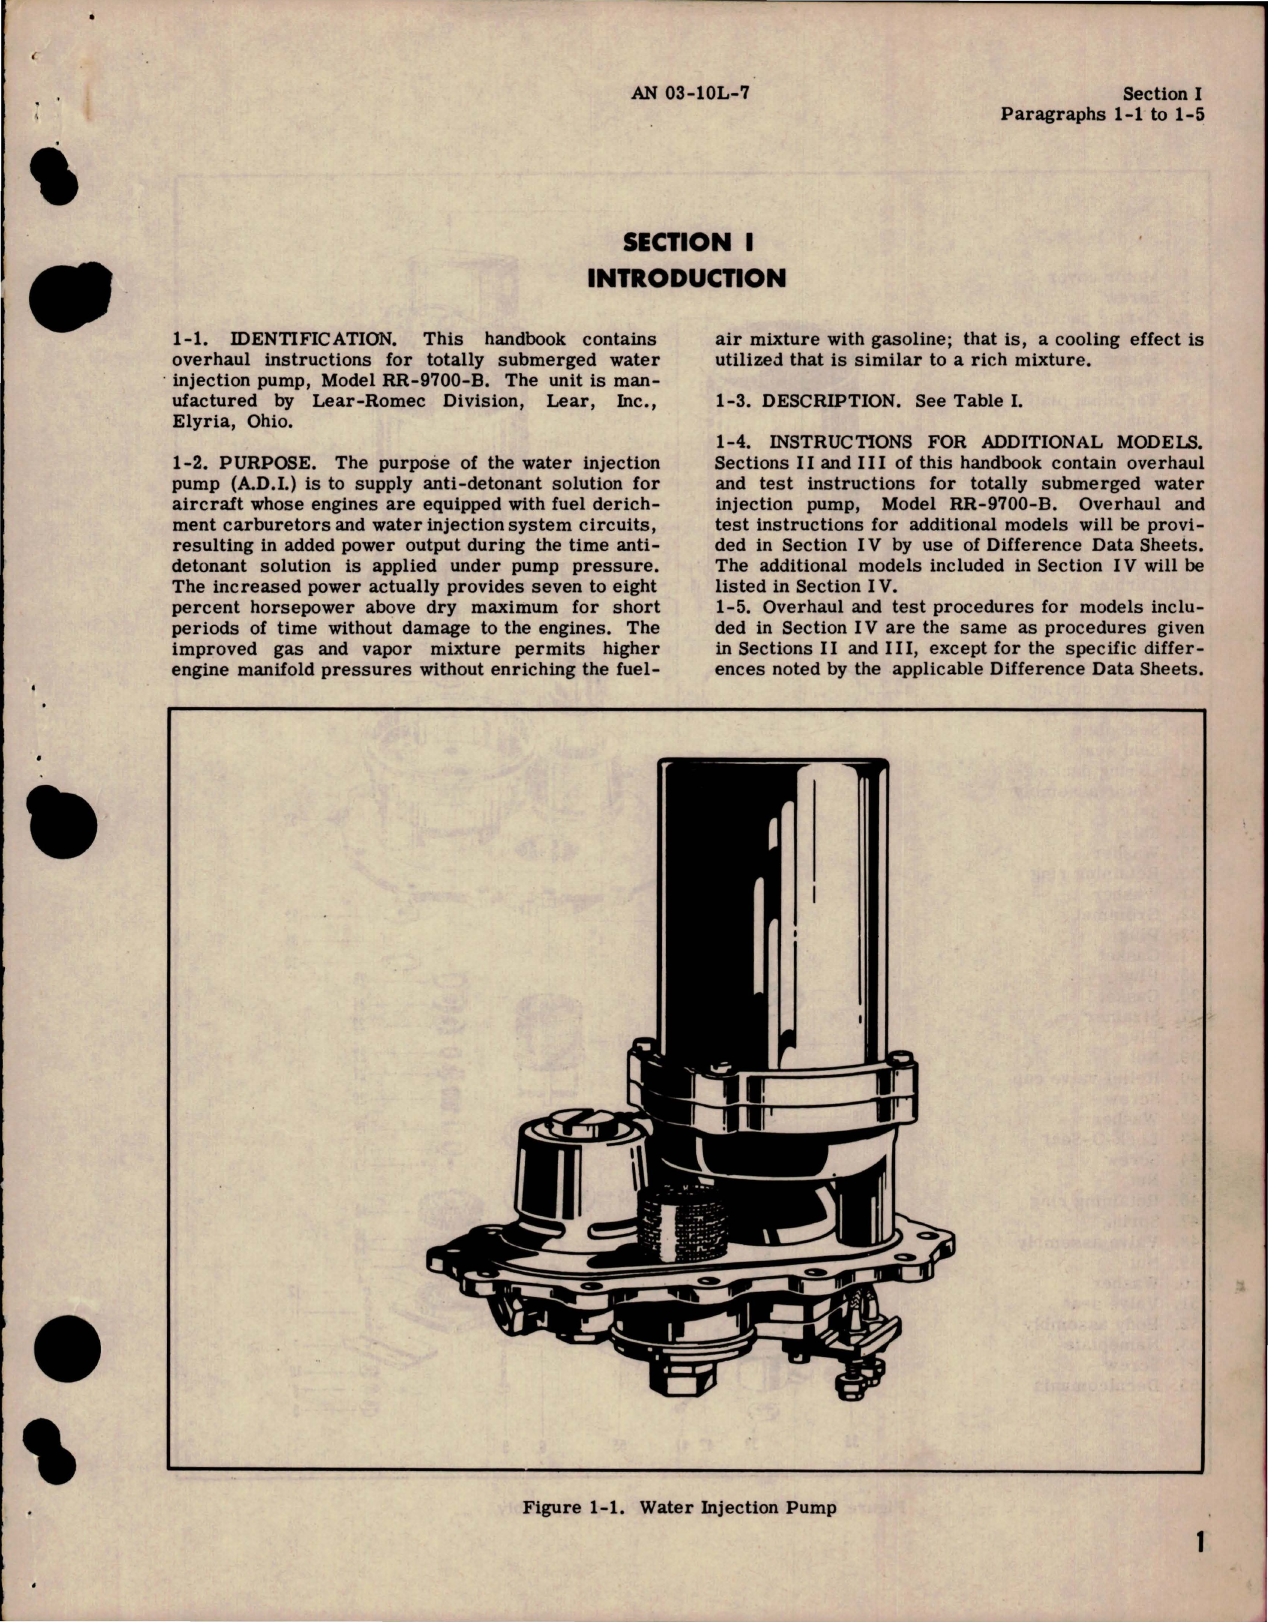 Sample page 5 from AirCorps Library document: Overhaul Instructions for Totally Submerged Water Injection Pump - Model RR-9700-B